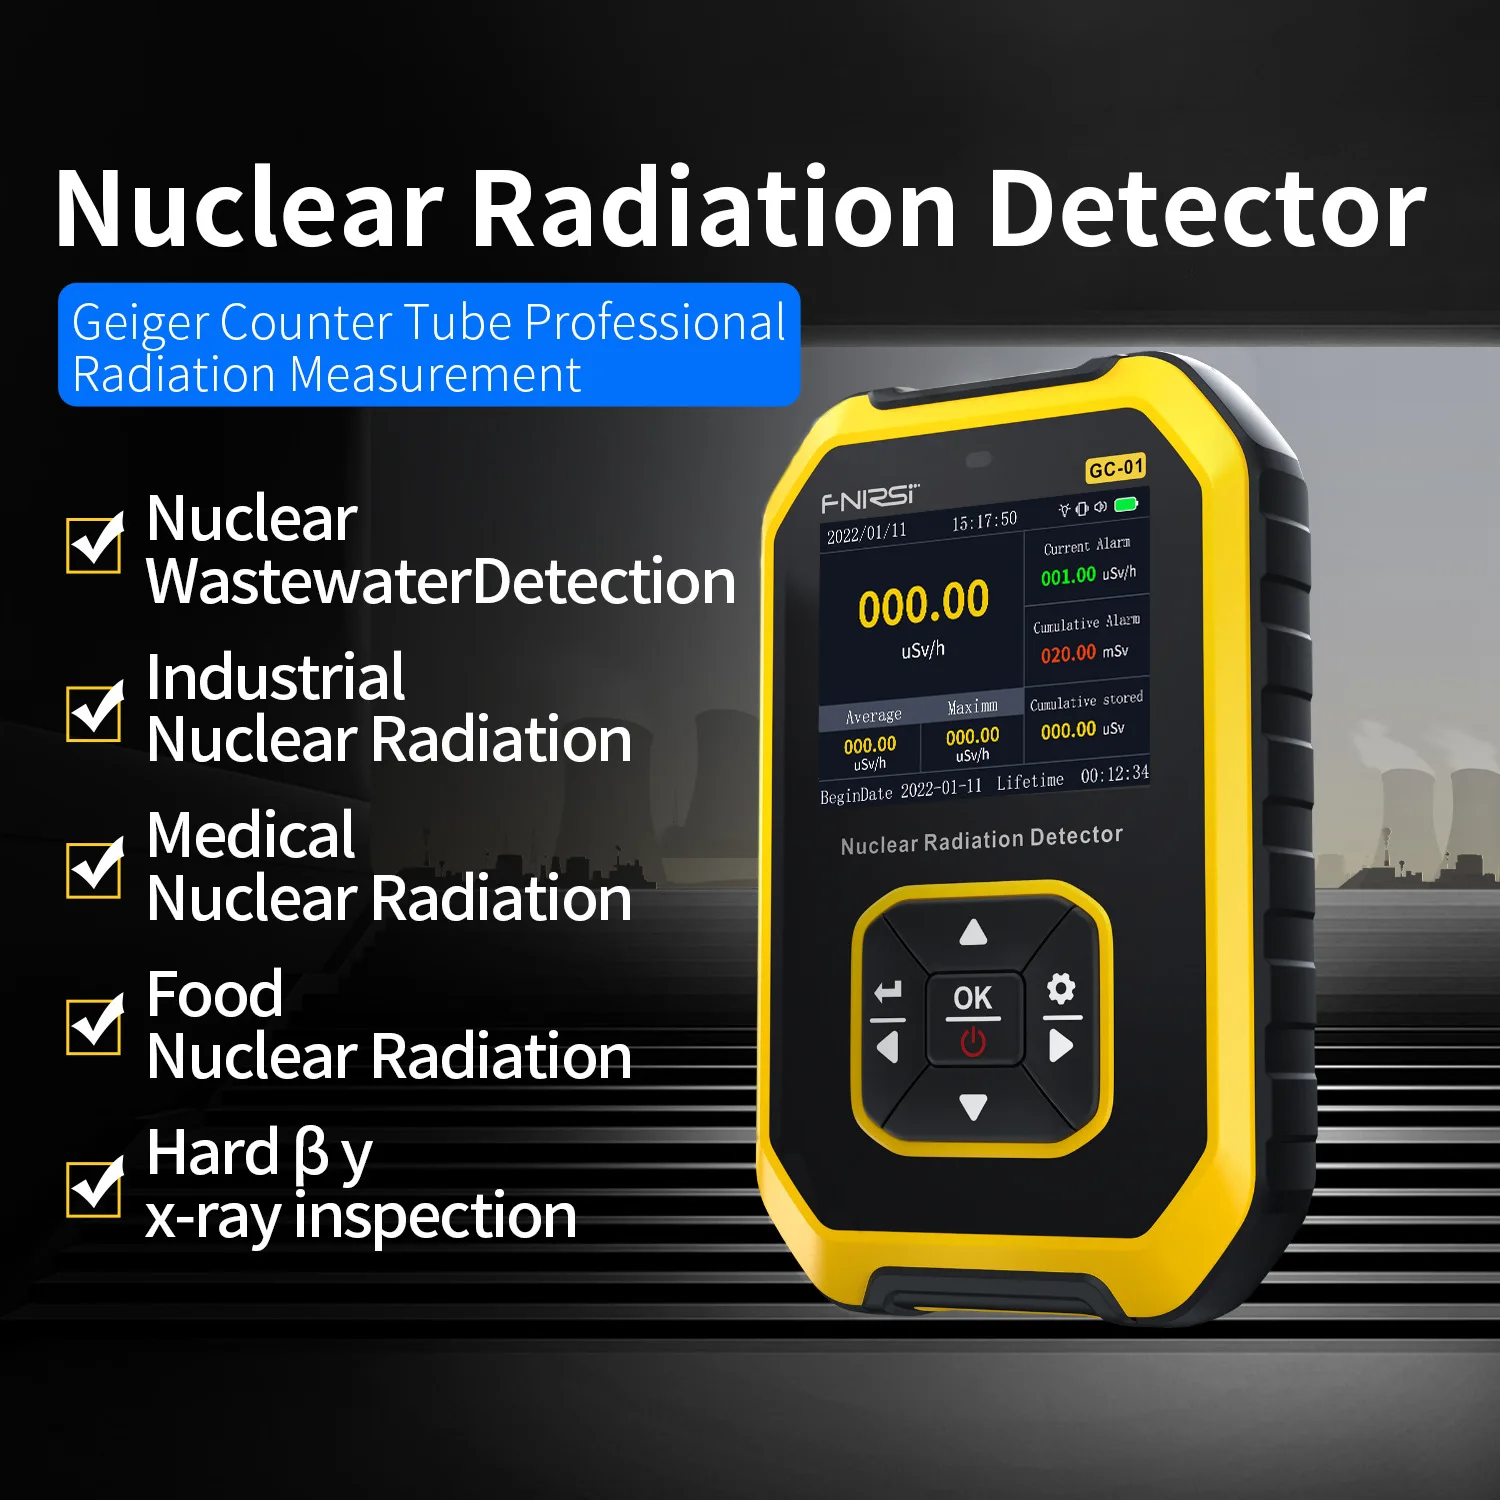 

Nuclear Radiation Detector Professional Marble Radioactive Ray Ionization Personal Dose Alarm Instrument Geiger Counter